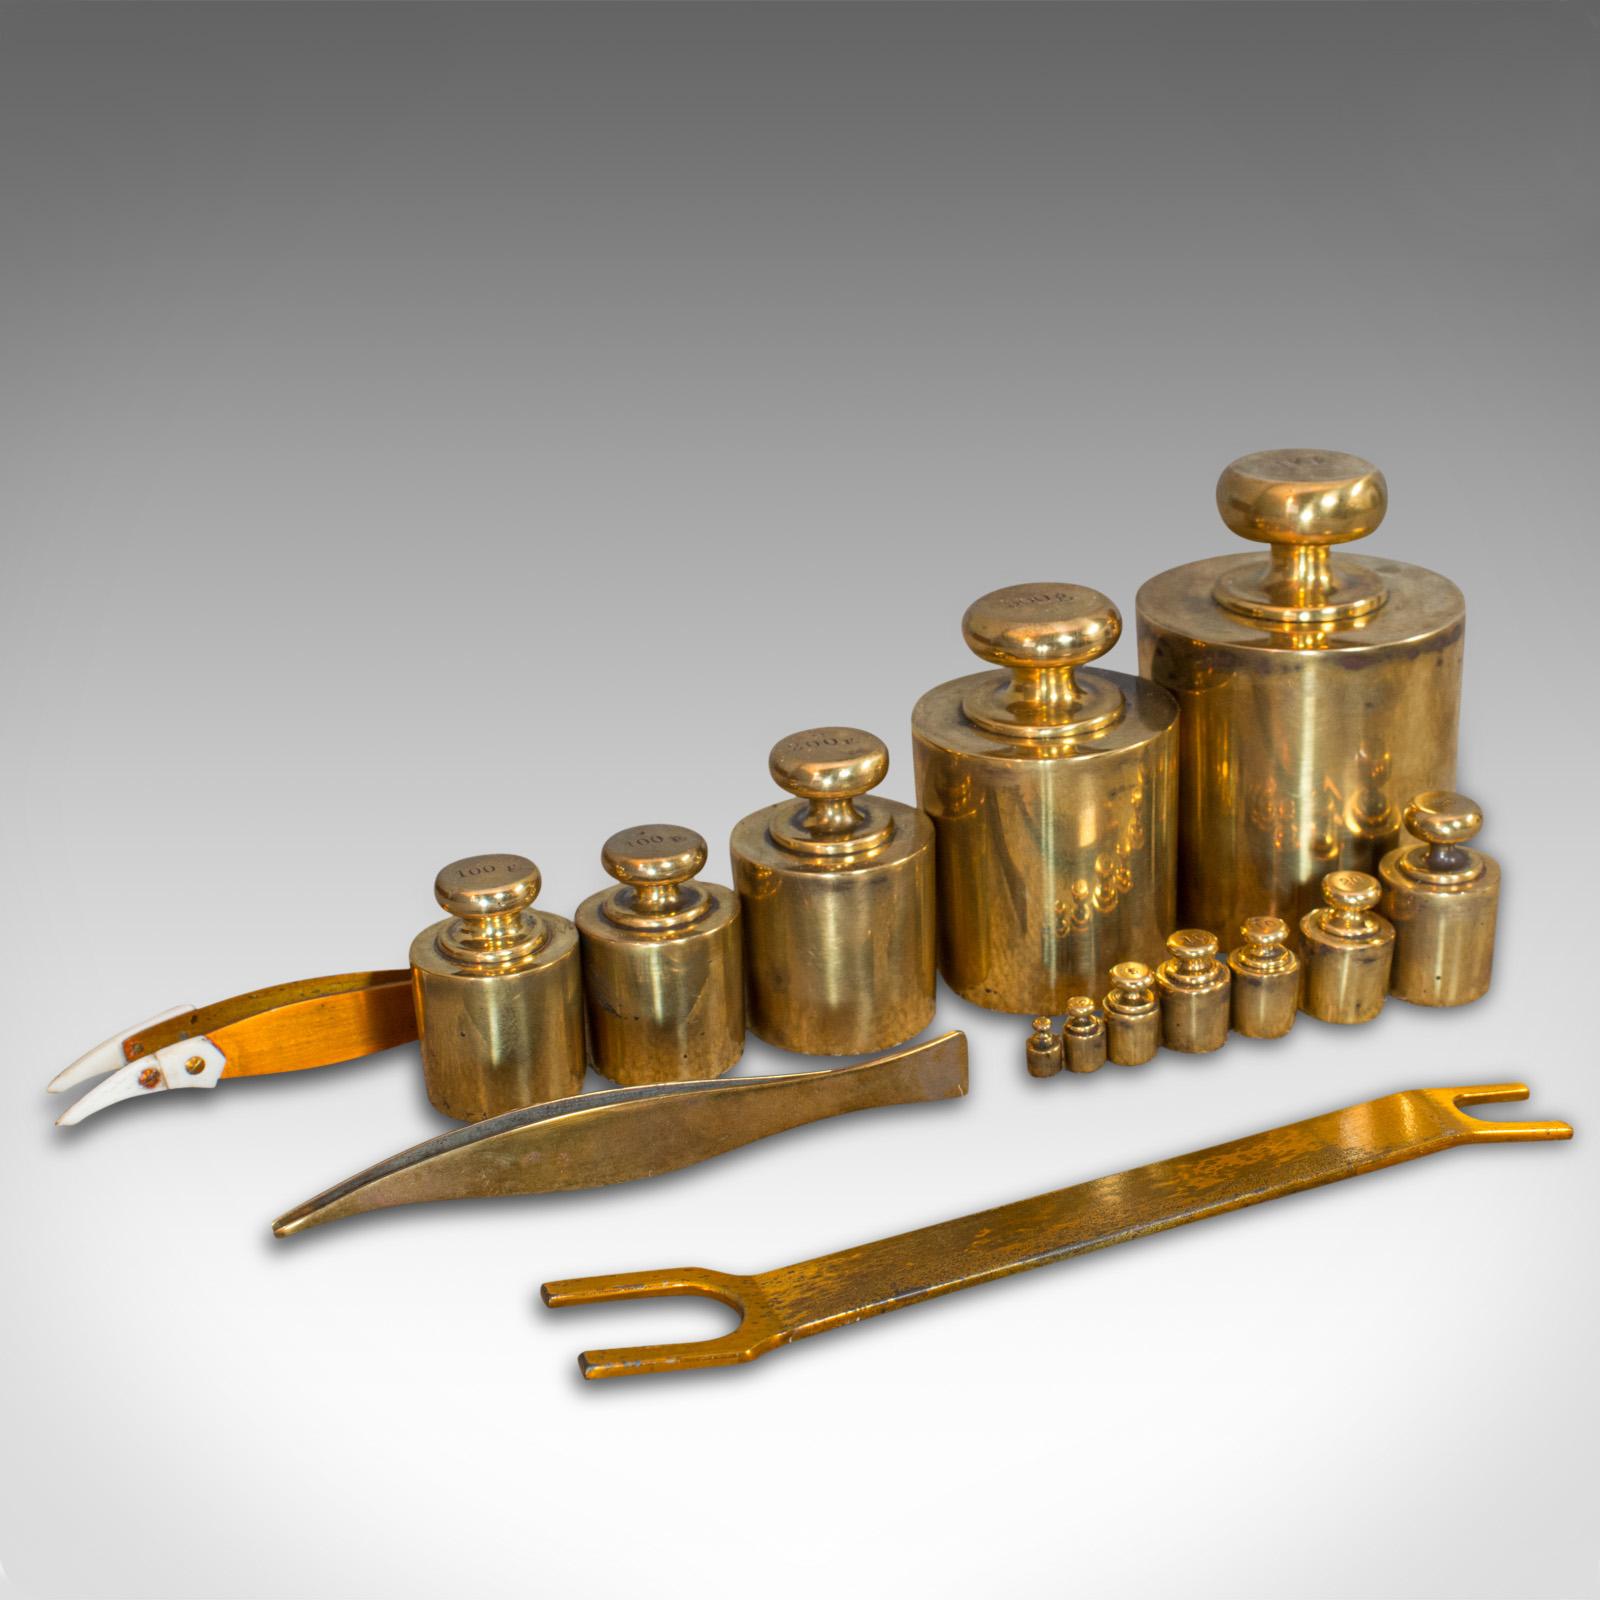 This is a set of vintage balance weights. An English, brass set of scientific apothecary assay weights, dating to the mid-20th century, circa 1950.

A quality set of assayer's weights
Displays a desirable aged patina, one small loss to 2g